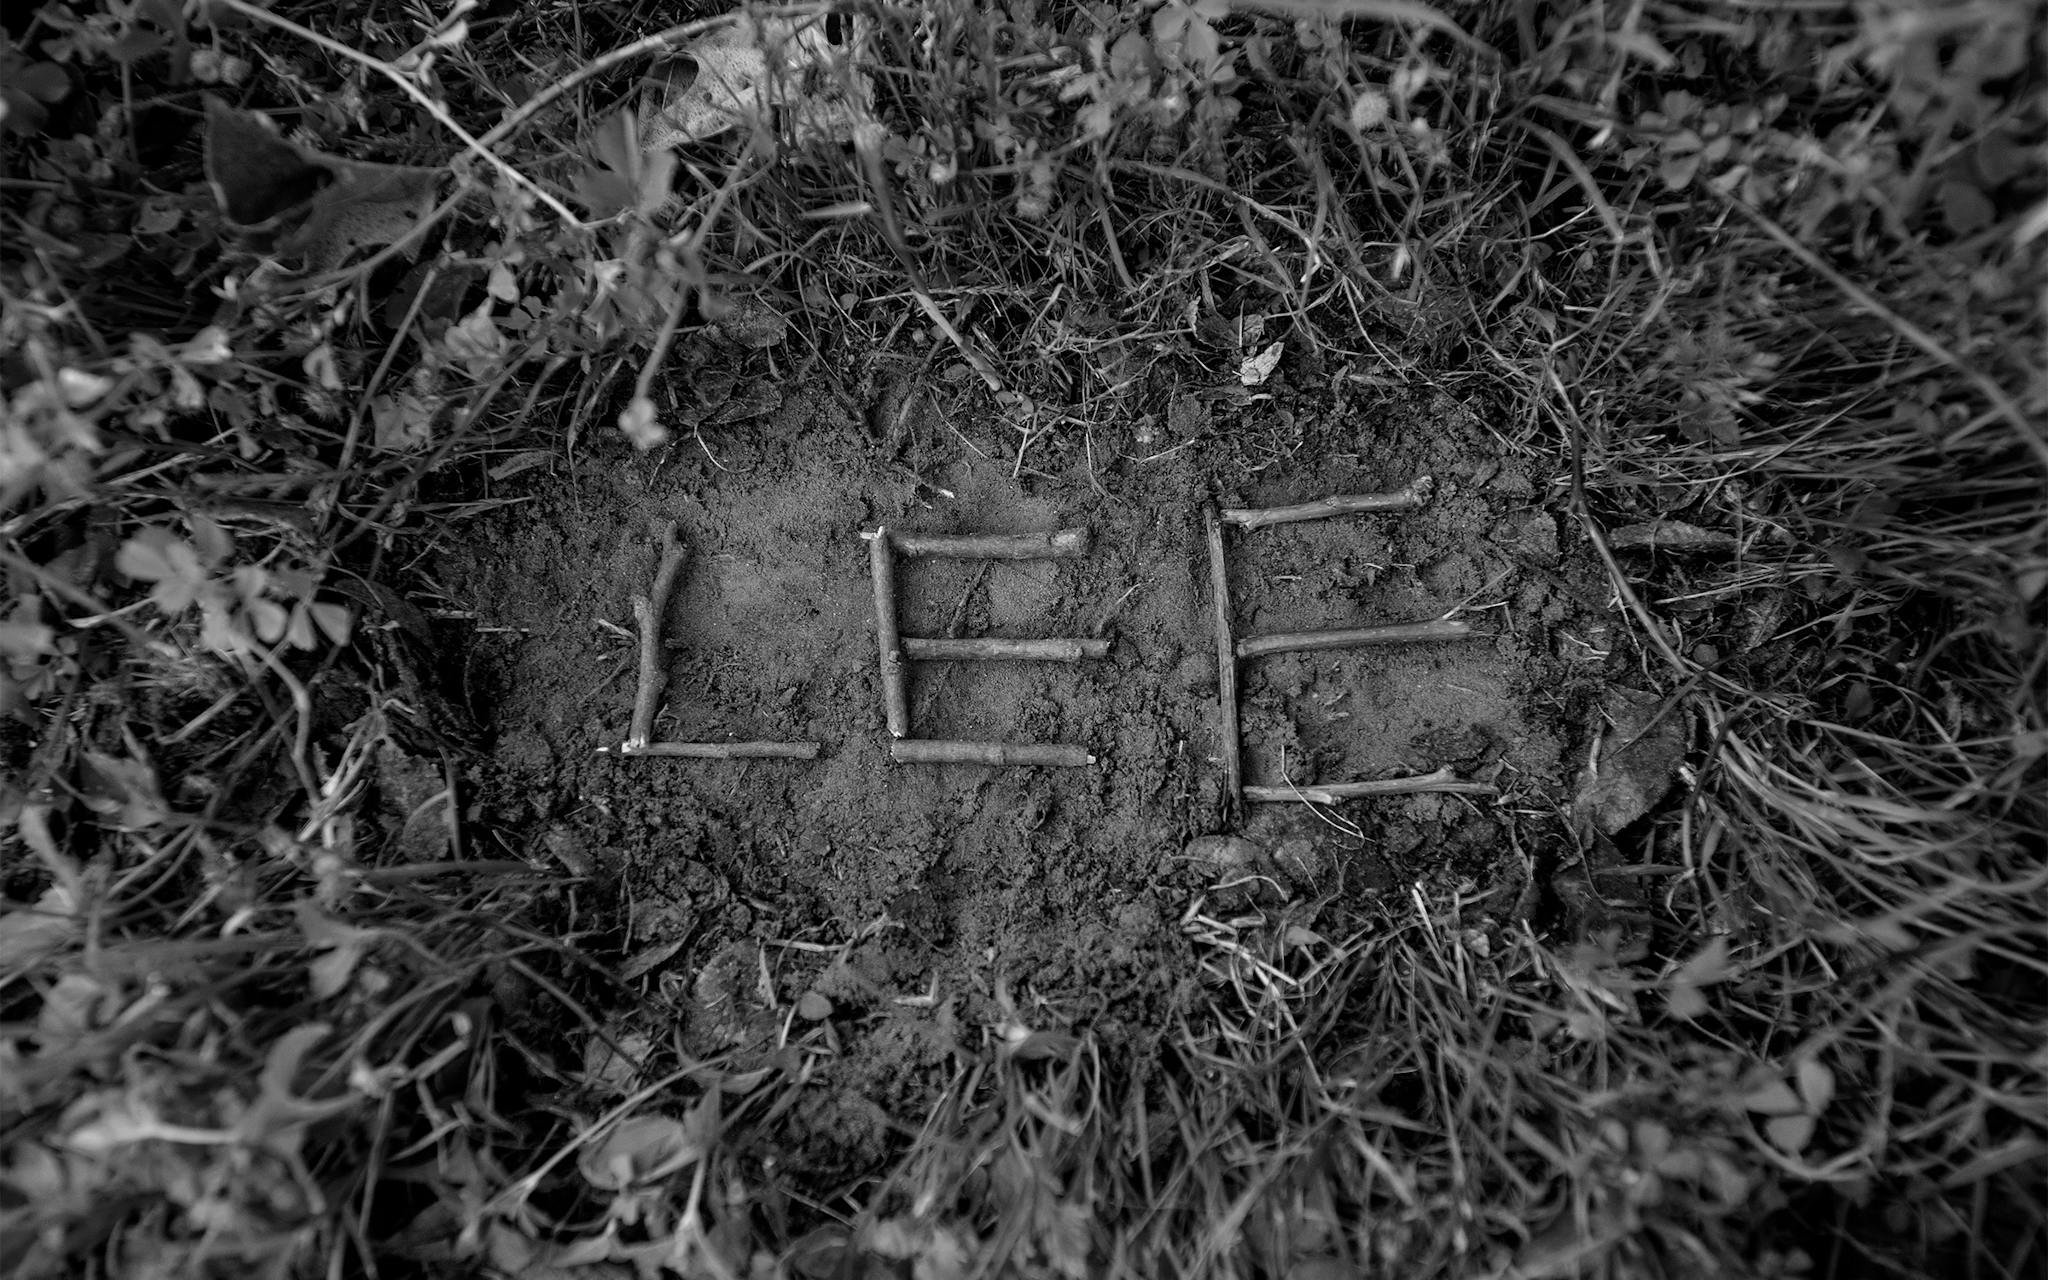 Lee left his name, formed out of twigs, at Assumption Cemetery in Austin on the tenth anniversary of his brother’s death, April 11, 2020.